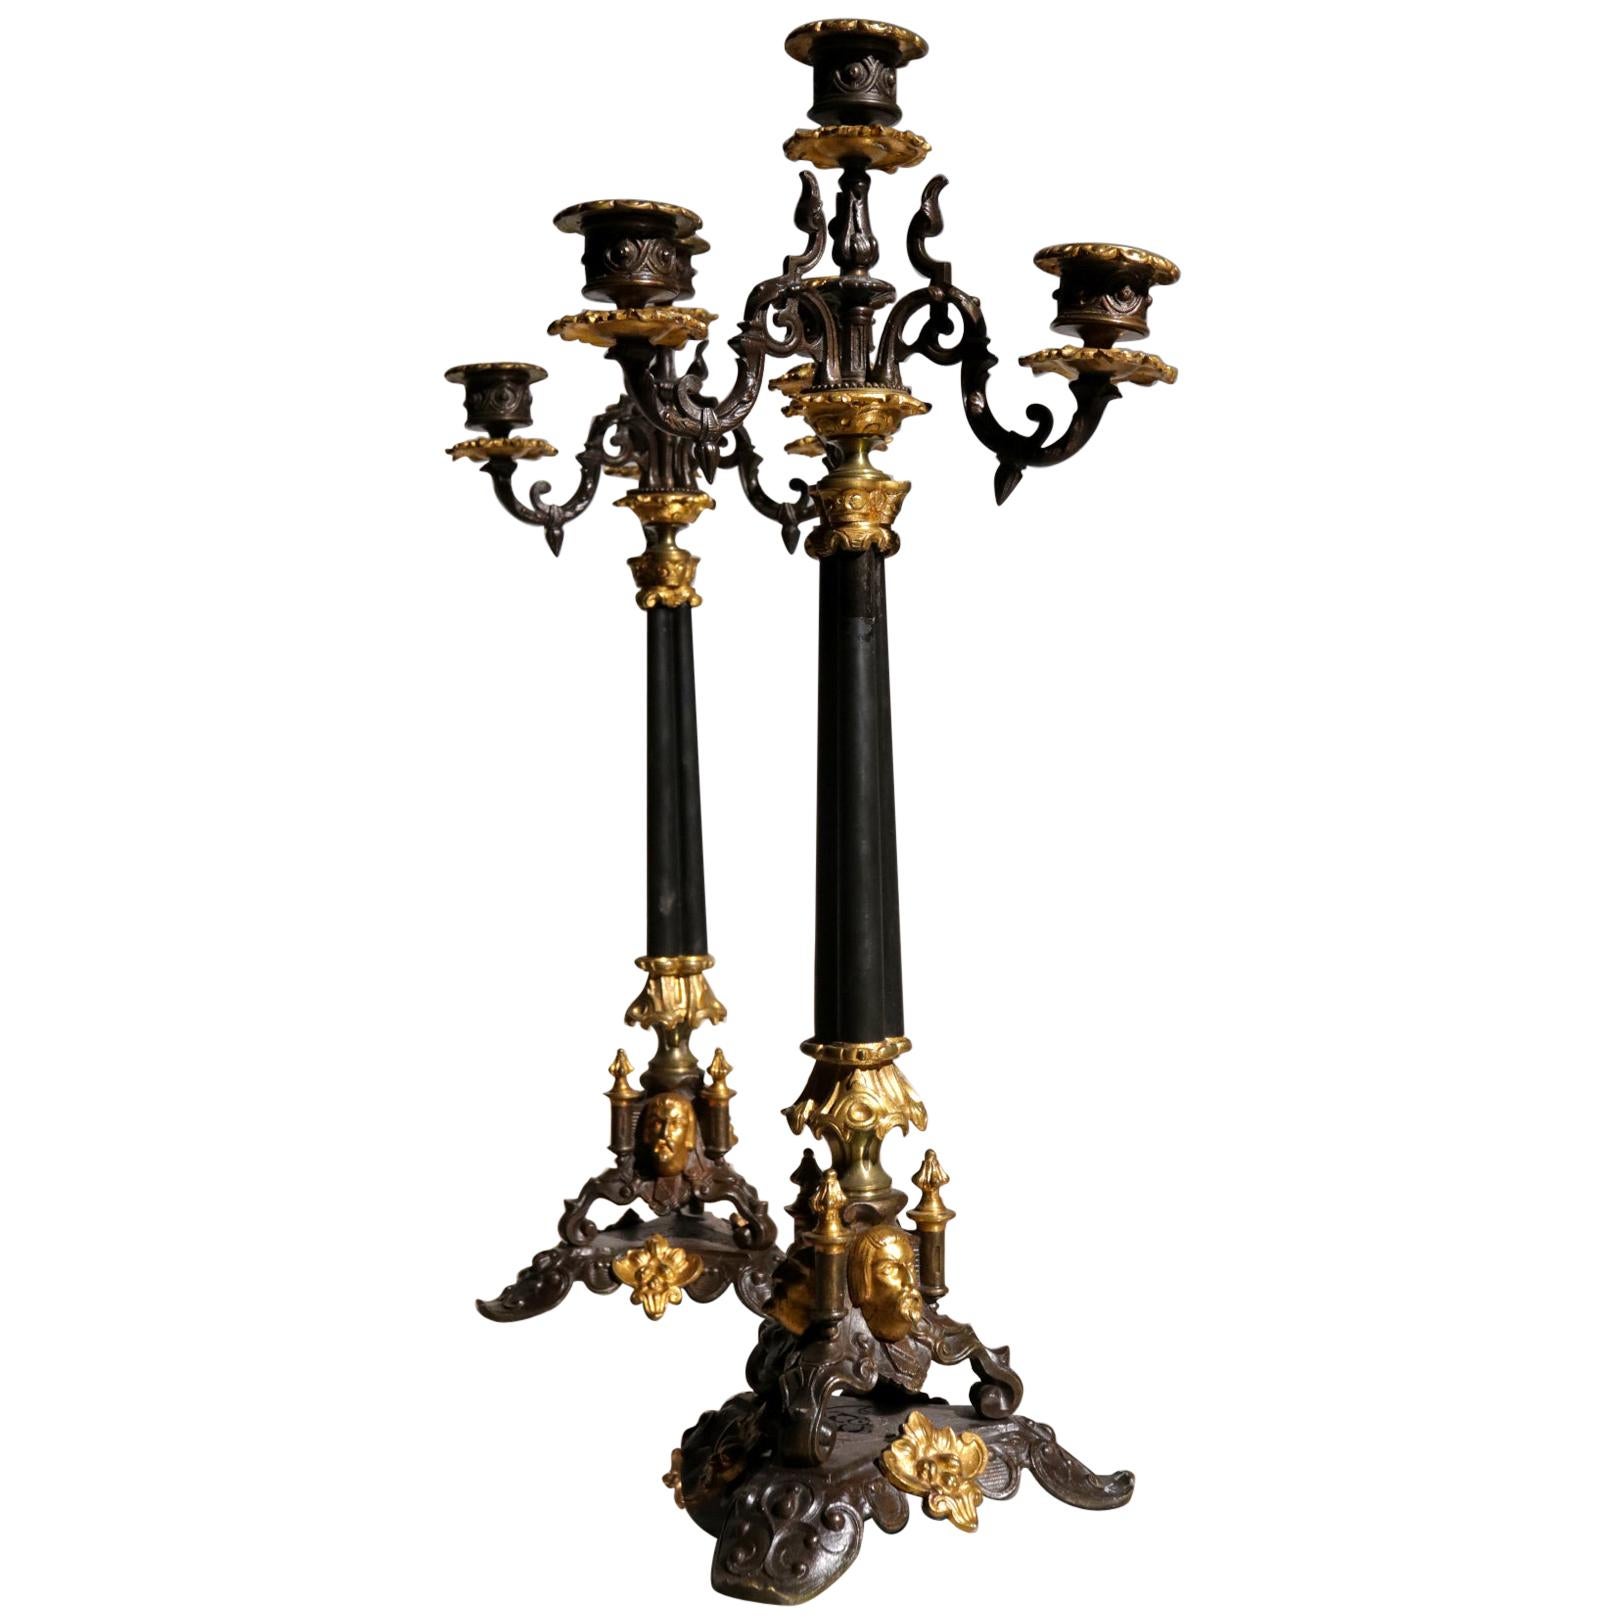 Pair of Richly Decorated 19th Century Patinated Gilt Candelabra For Sale